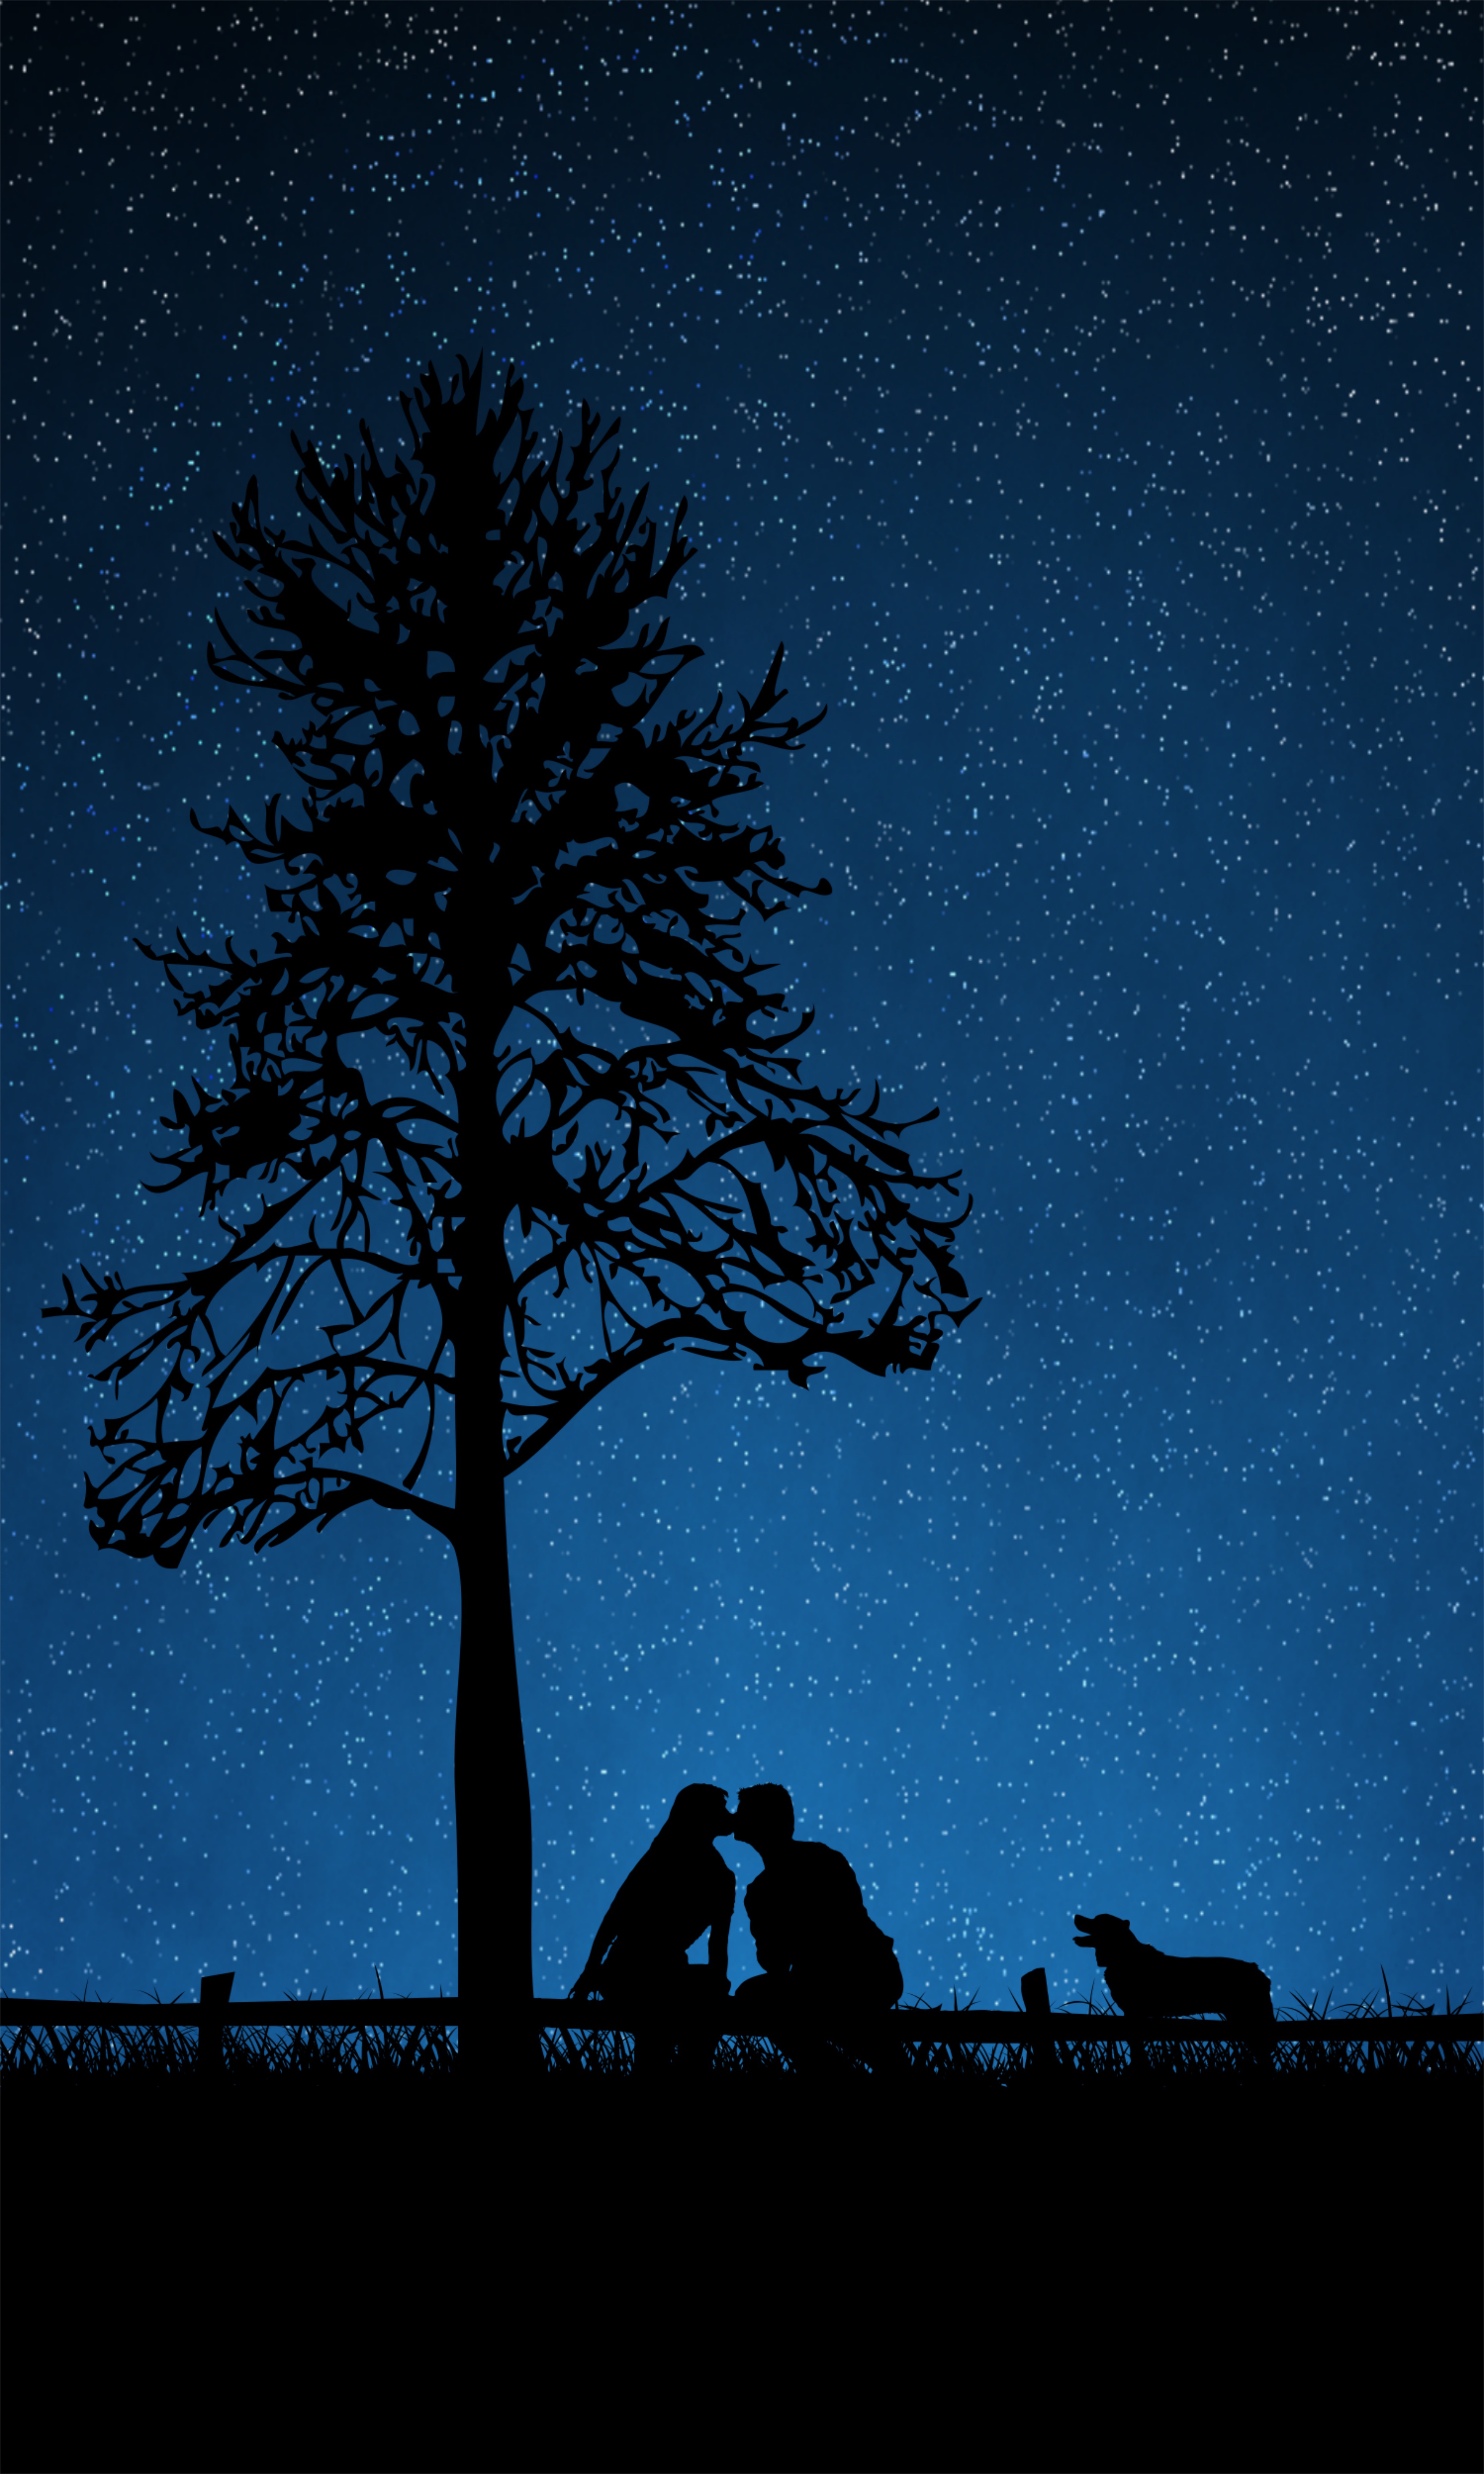 kiss, couple, pair, love, wood, tree, dog, silhouettes, starry sky